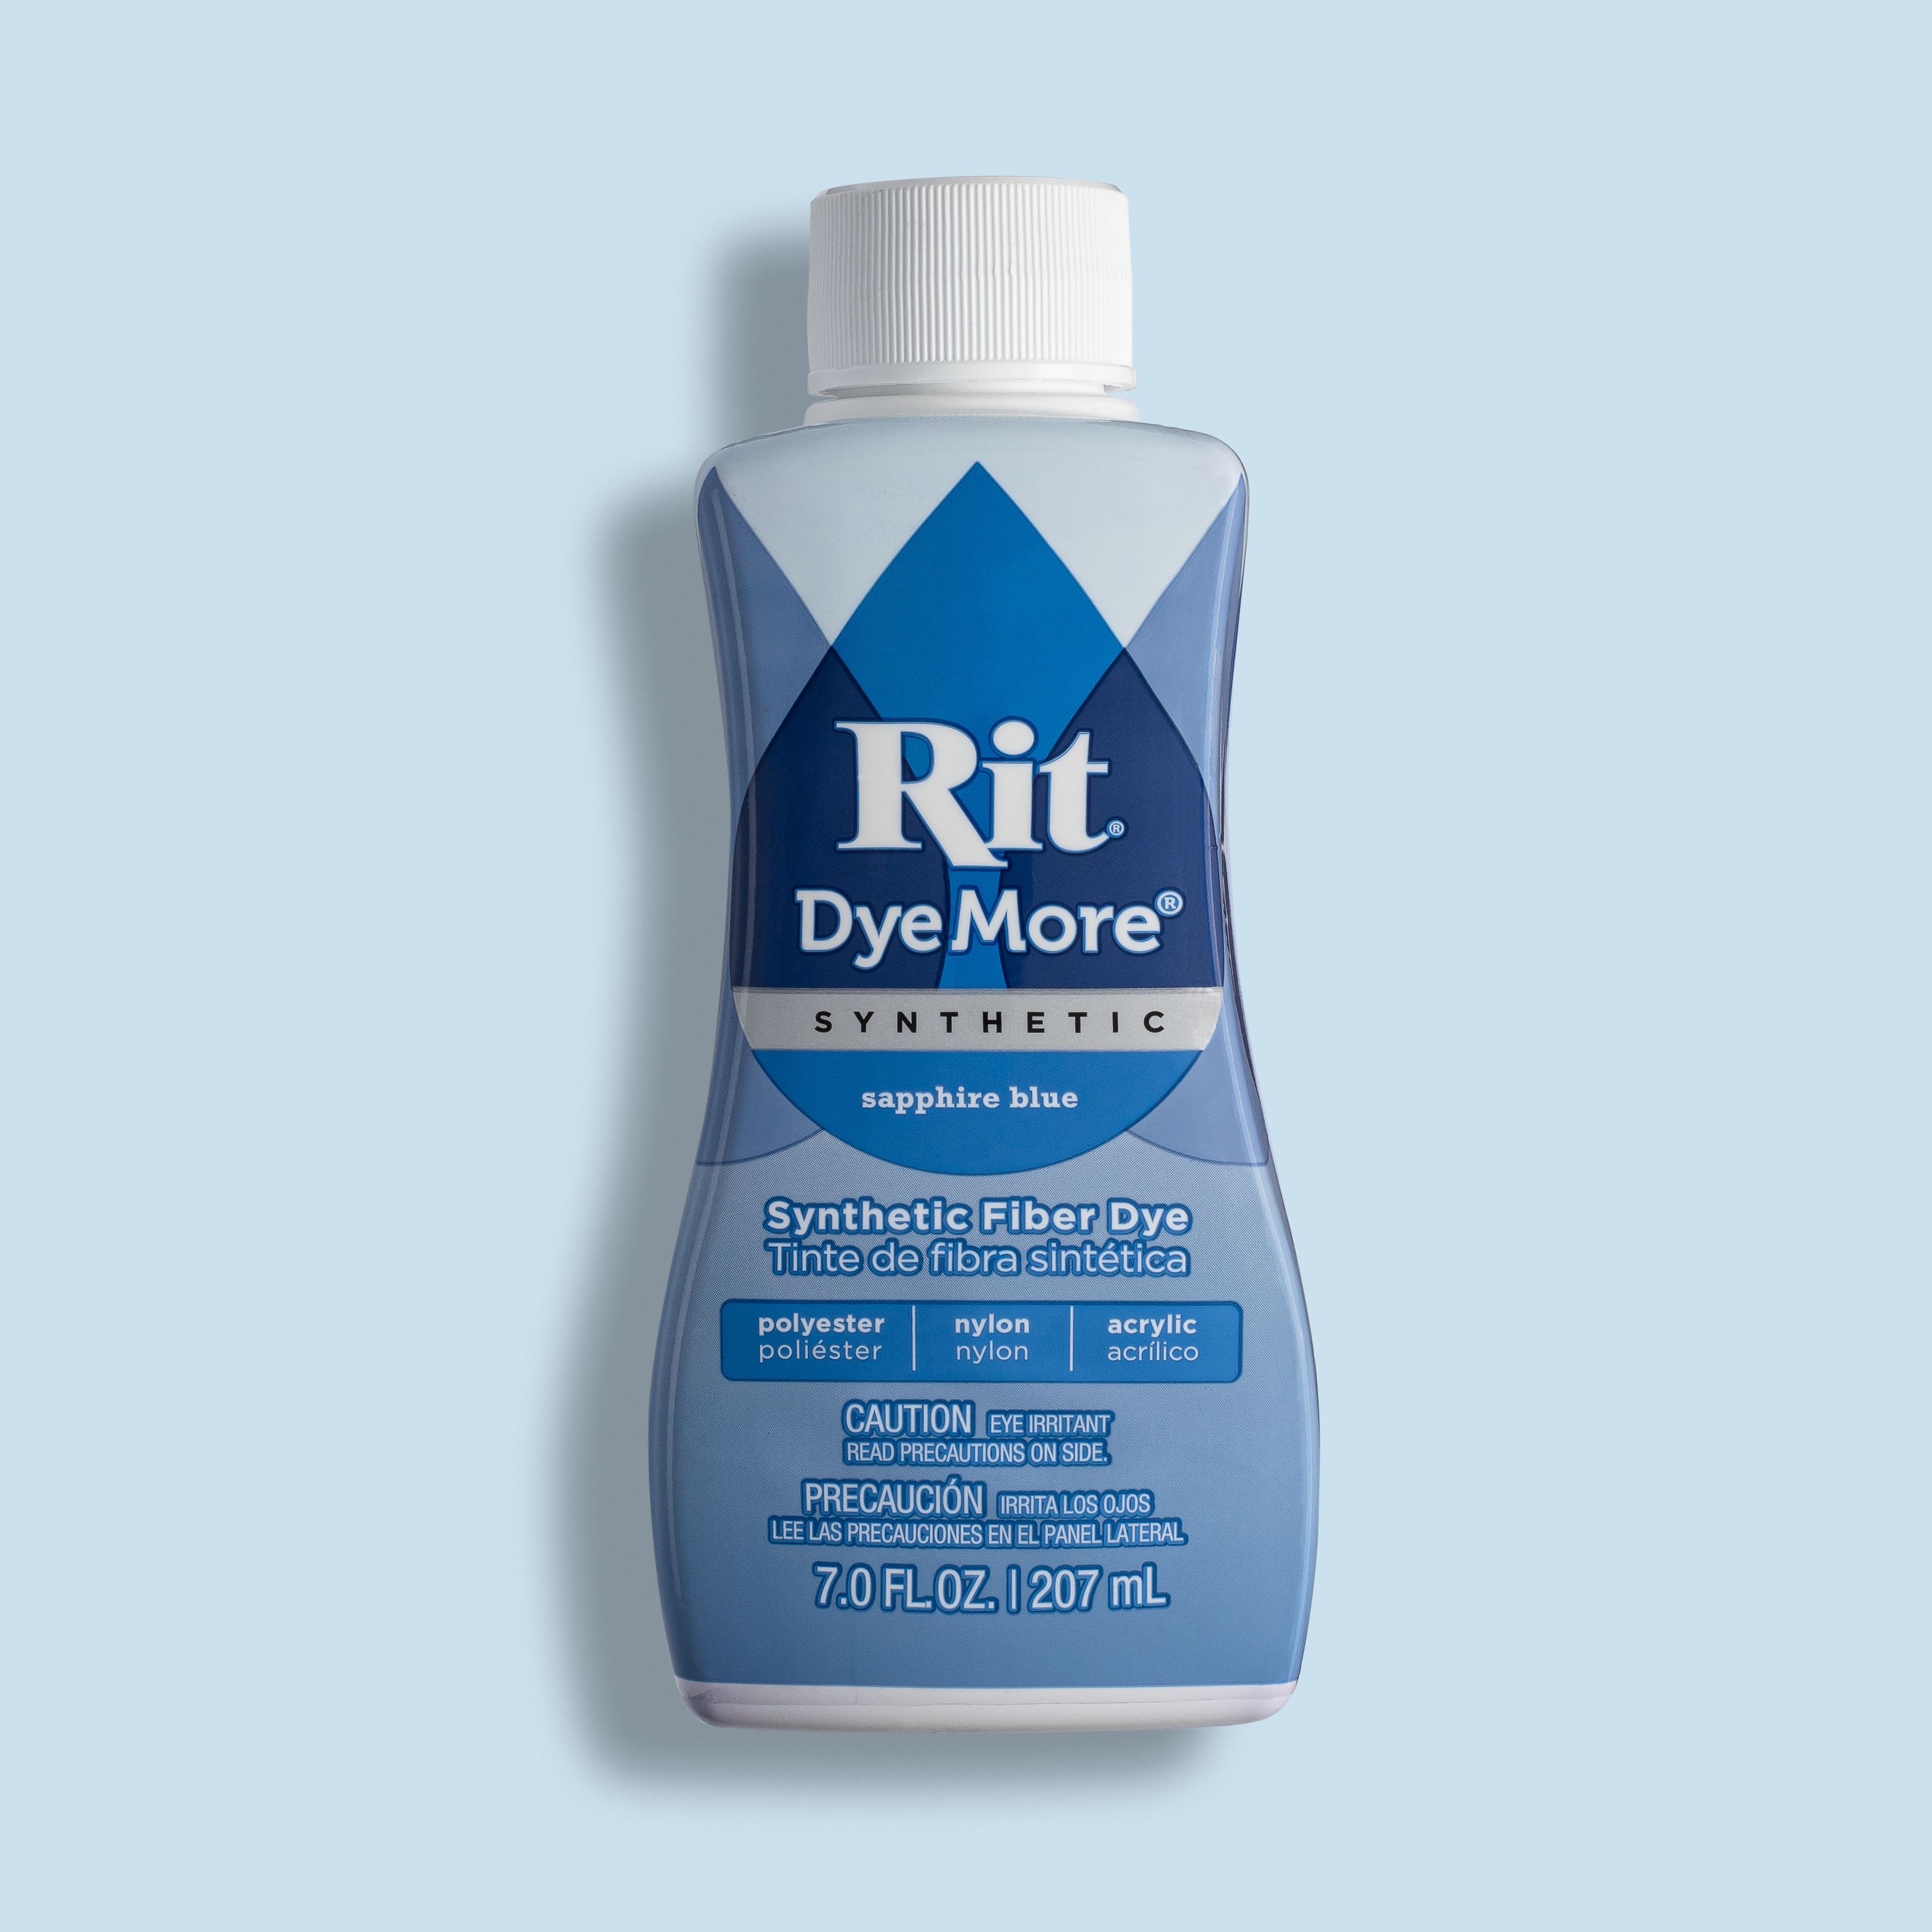 Rit Dye More Synthetic Stores